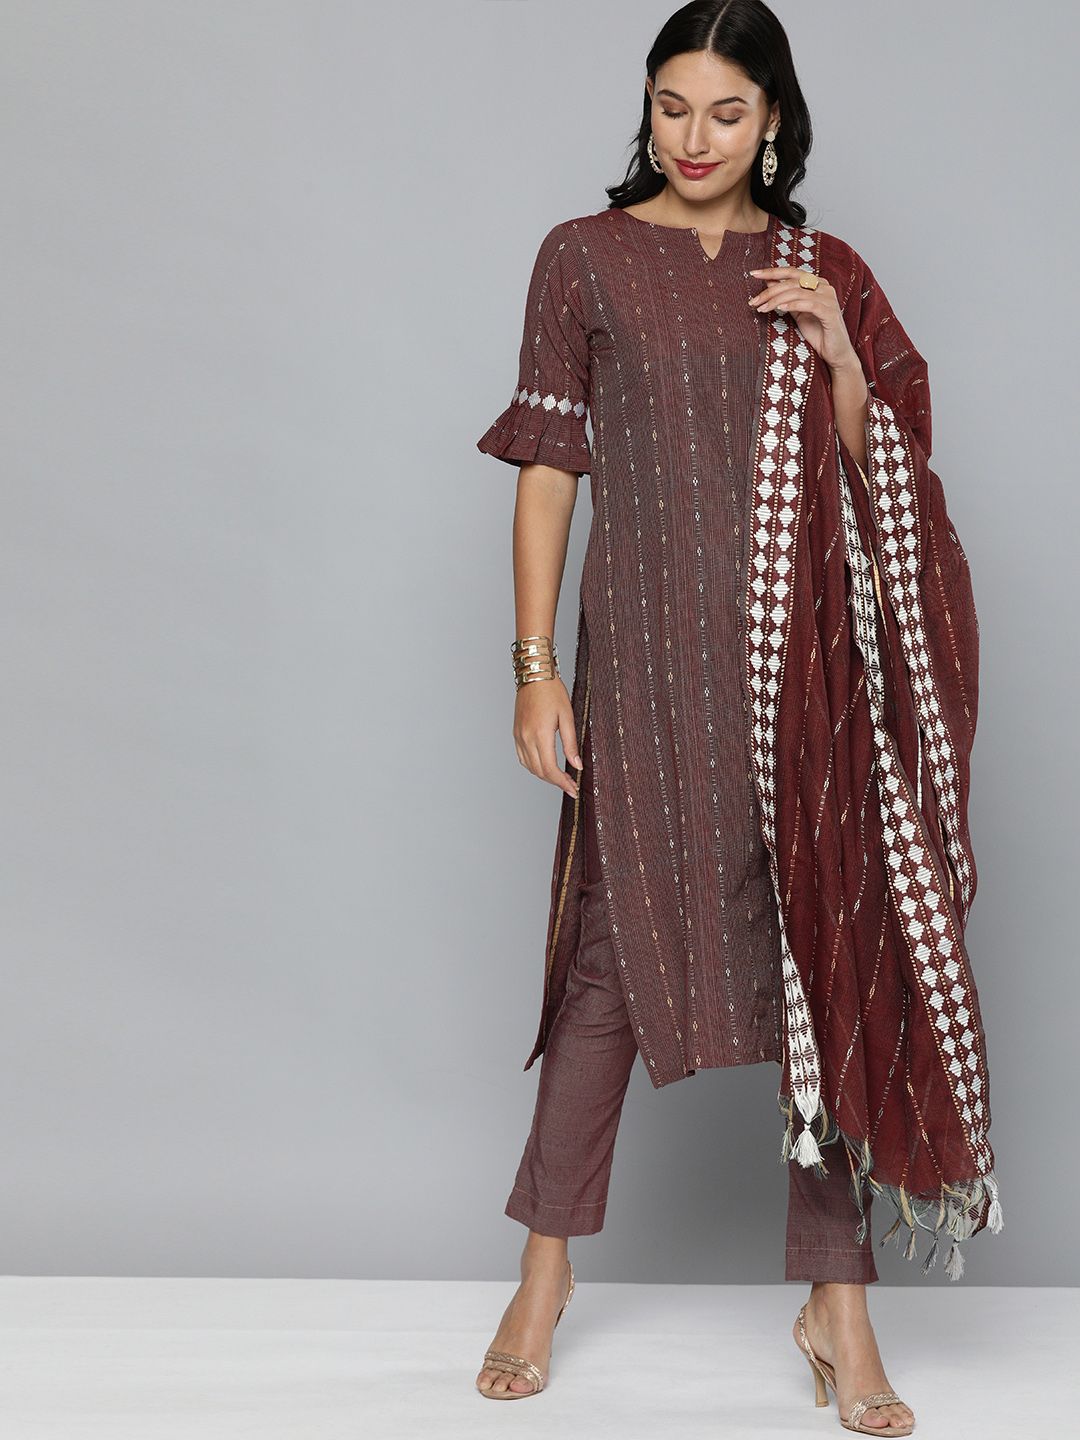 Kvsfab Rust Brown & White Ethnic Motif Patterned Pure Cotton Unstitched Dress Material Price in India